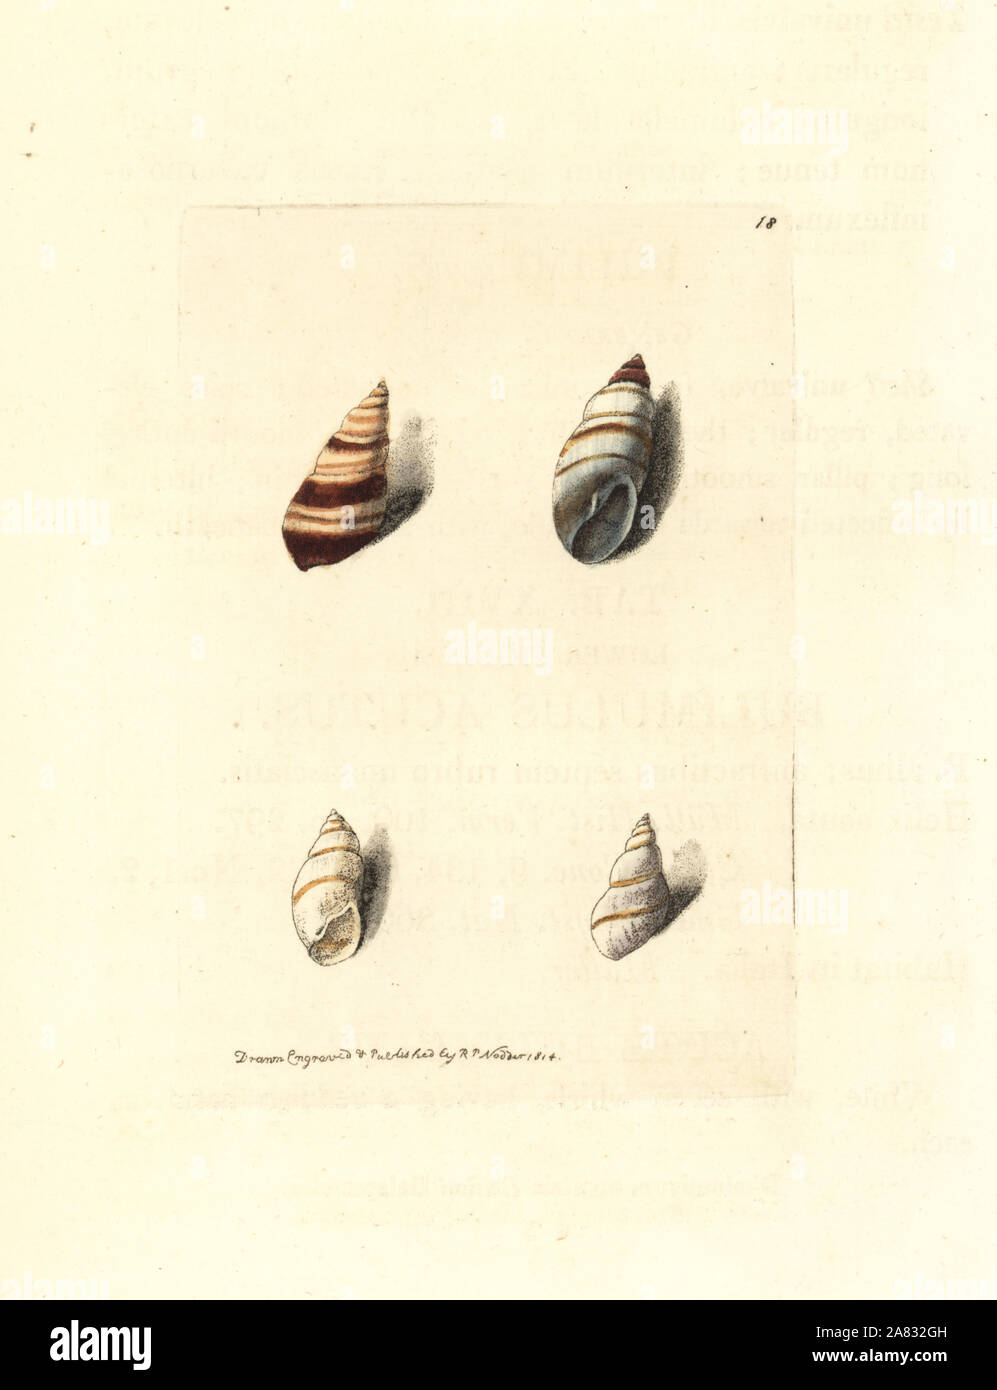 Acute and three-banded bulimulus snails, Bulimulus acutus and Bulimulus trifasciatus. Handcoloured copperplate engraving drawn and engraved by Richard Polydore Nodder from William Elford Leach's Zoological Miscellany, McMillan, London, 1814. Stock Photo